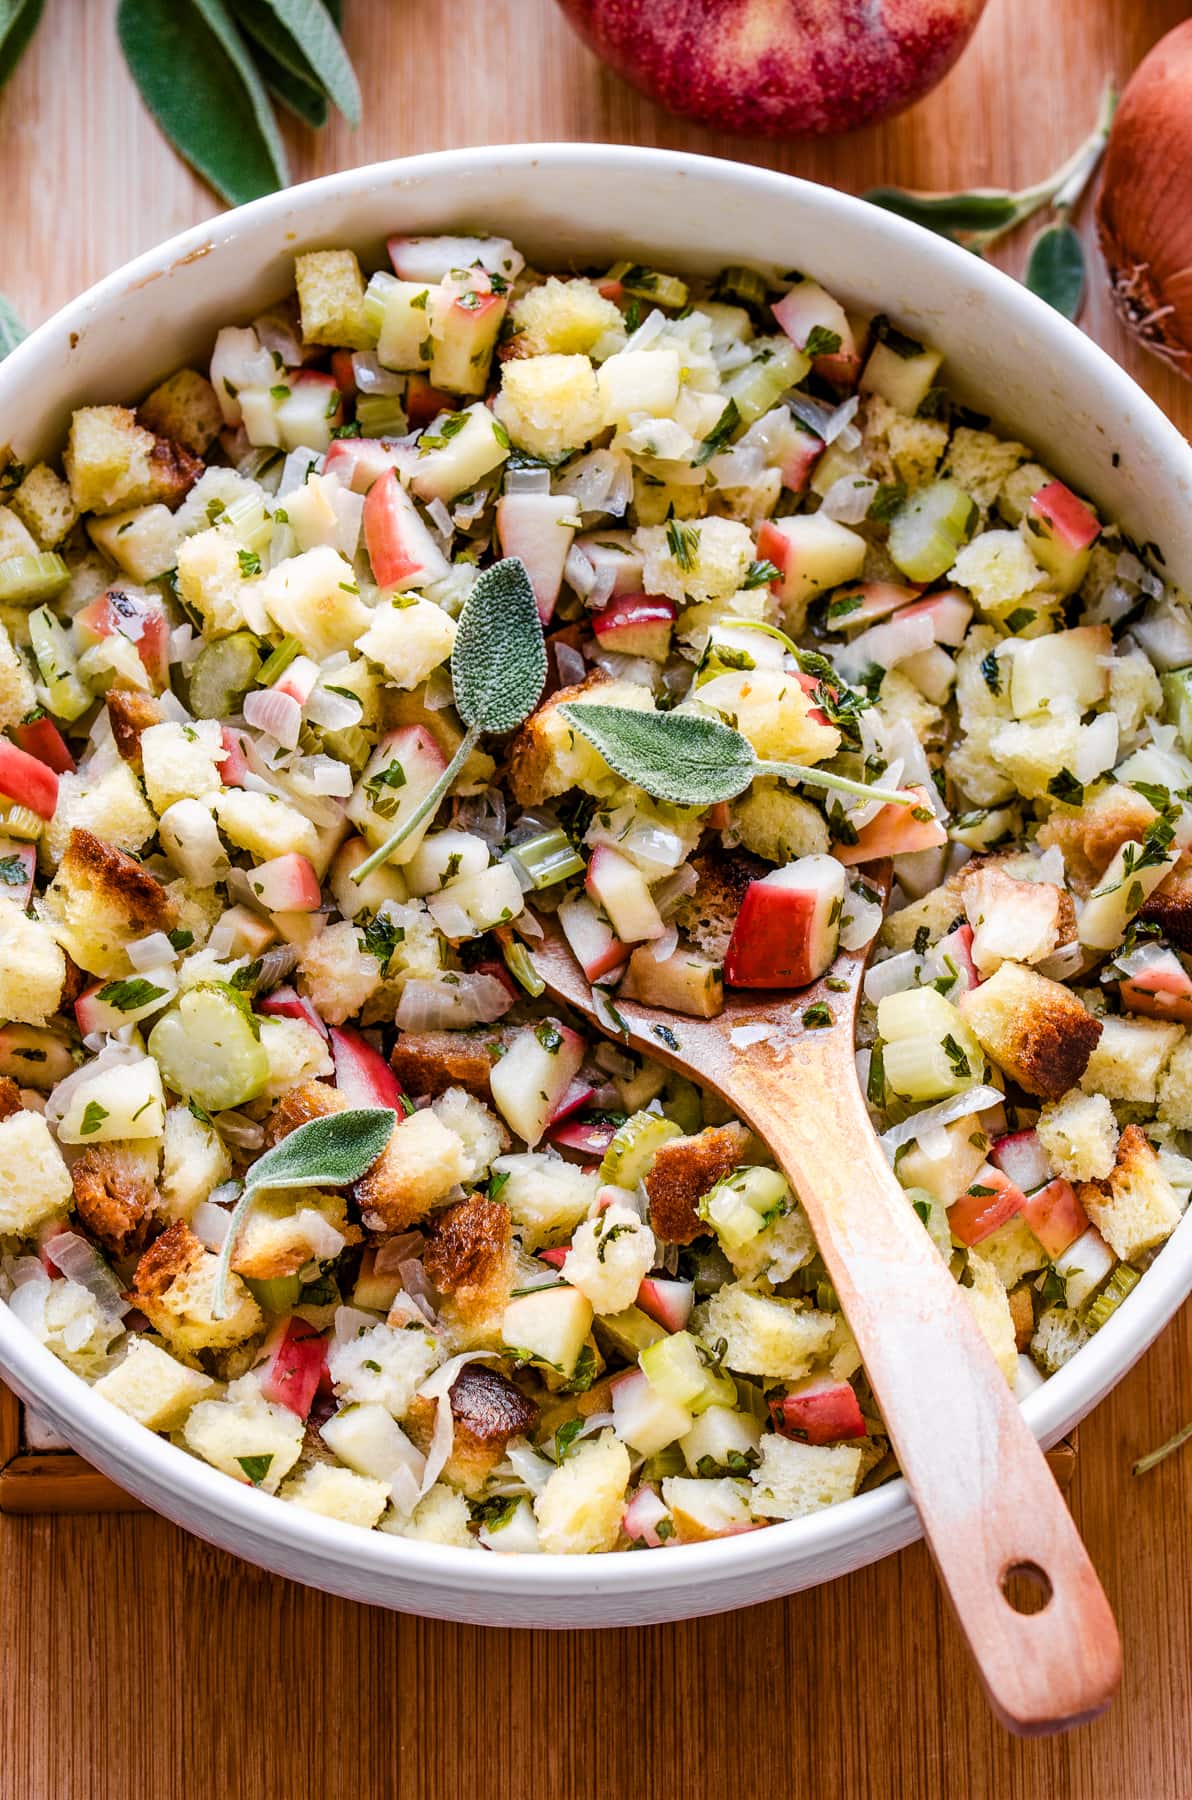 Apple stuffing in a white bowl with a wooden spoon inside the stuffing and topped with fresh sage.